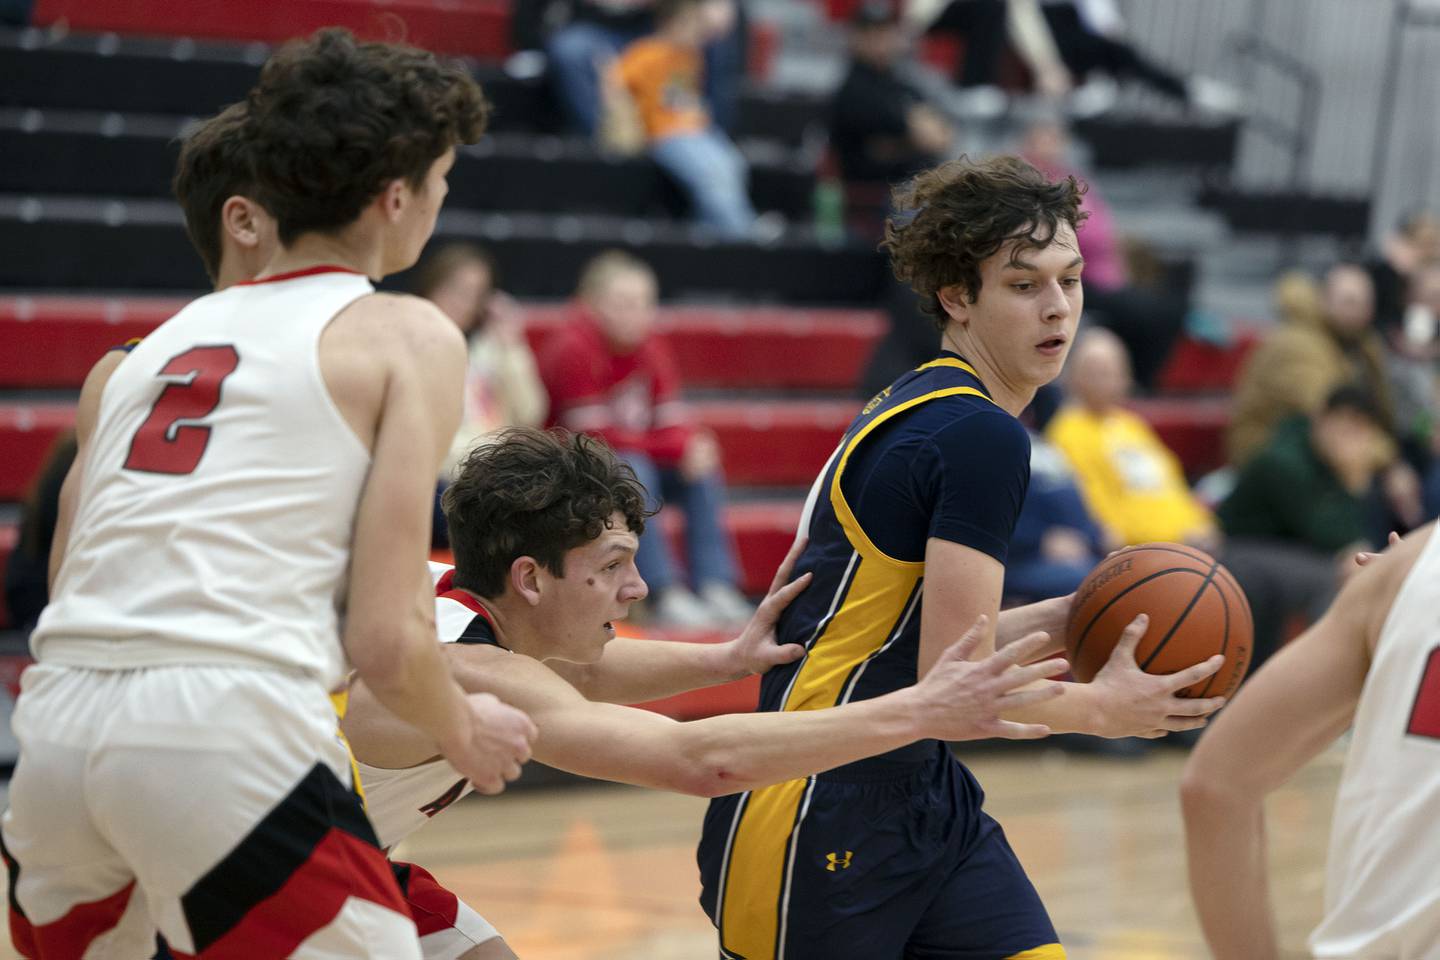 Polo's Carter Merdian handles the ball Wednesday, Jan. 25, 2023 in a game against Amboy.